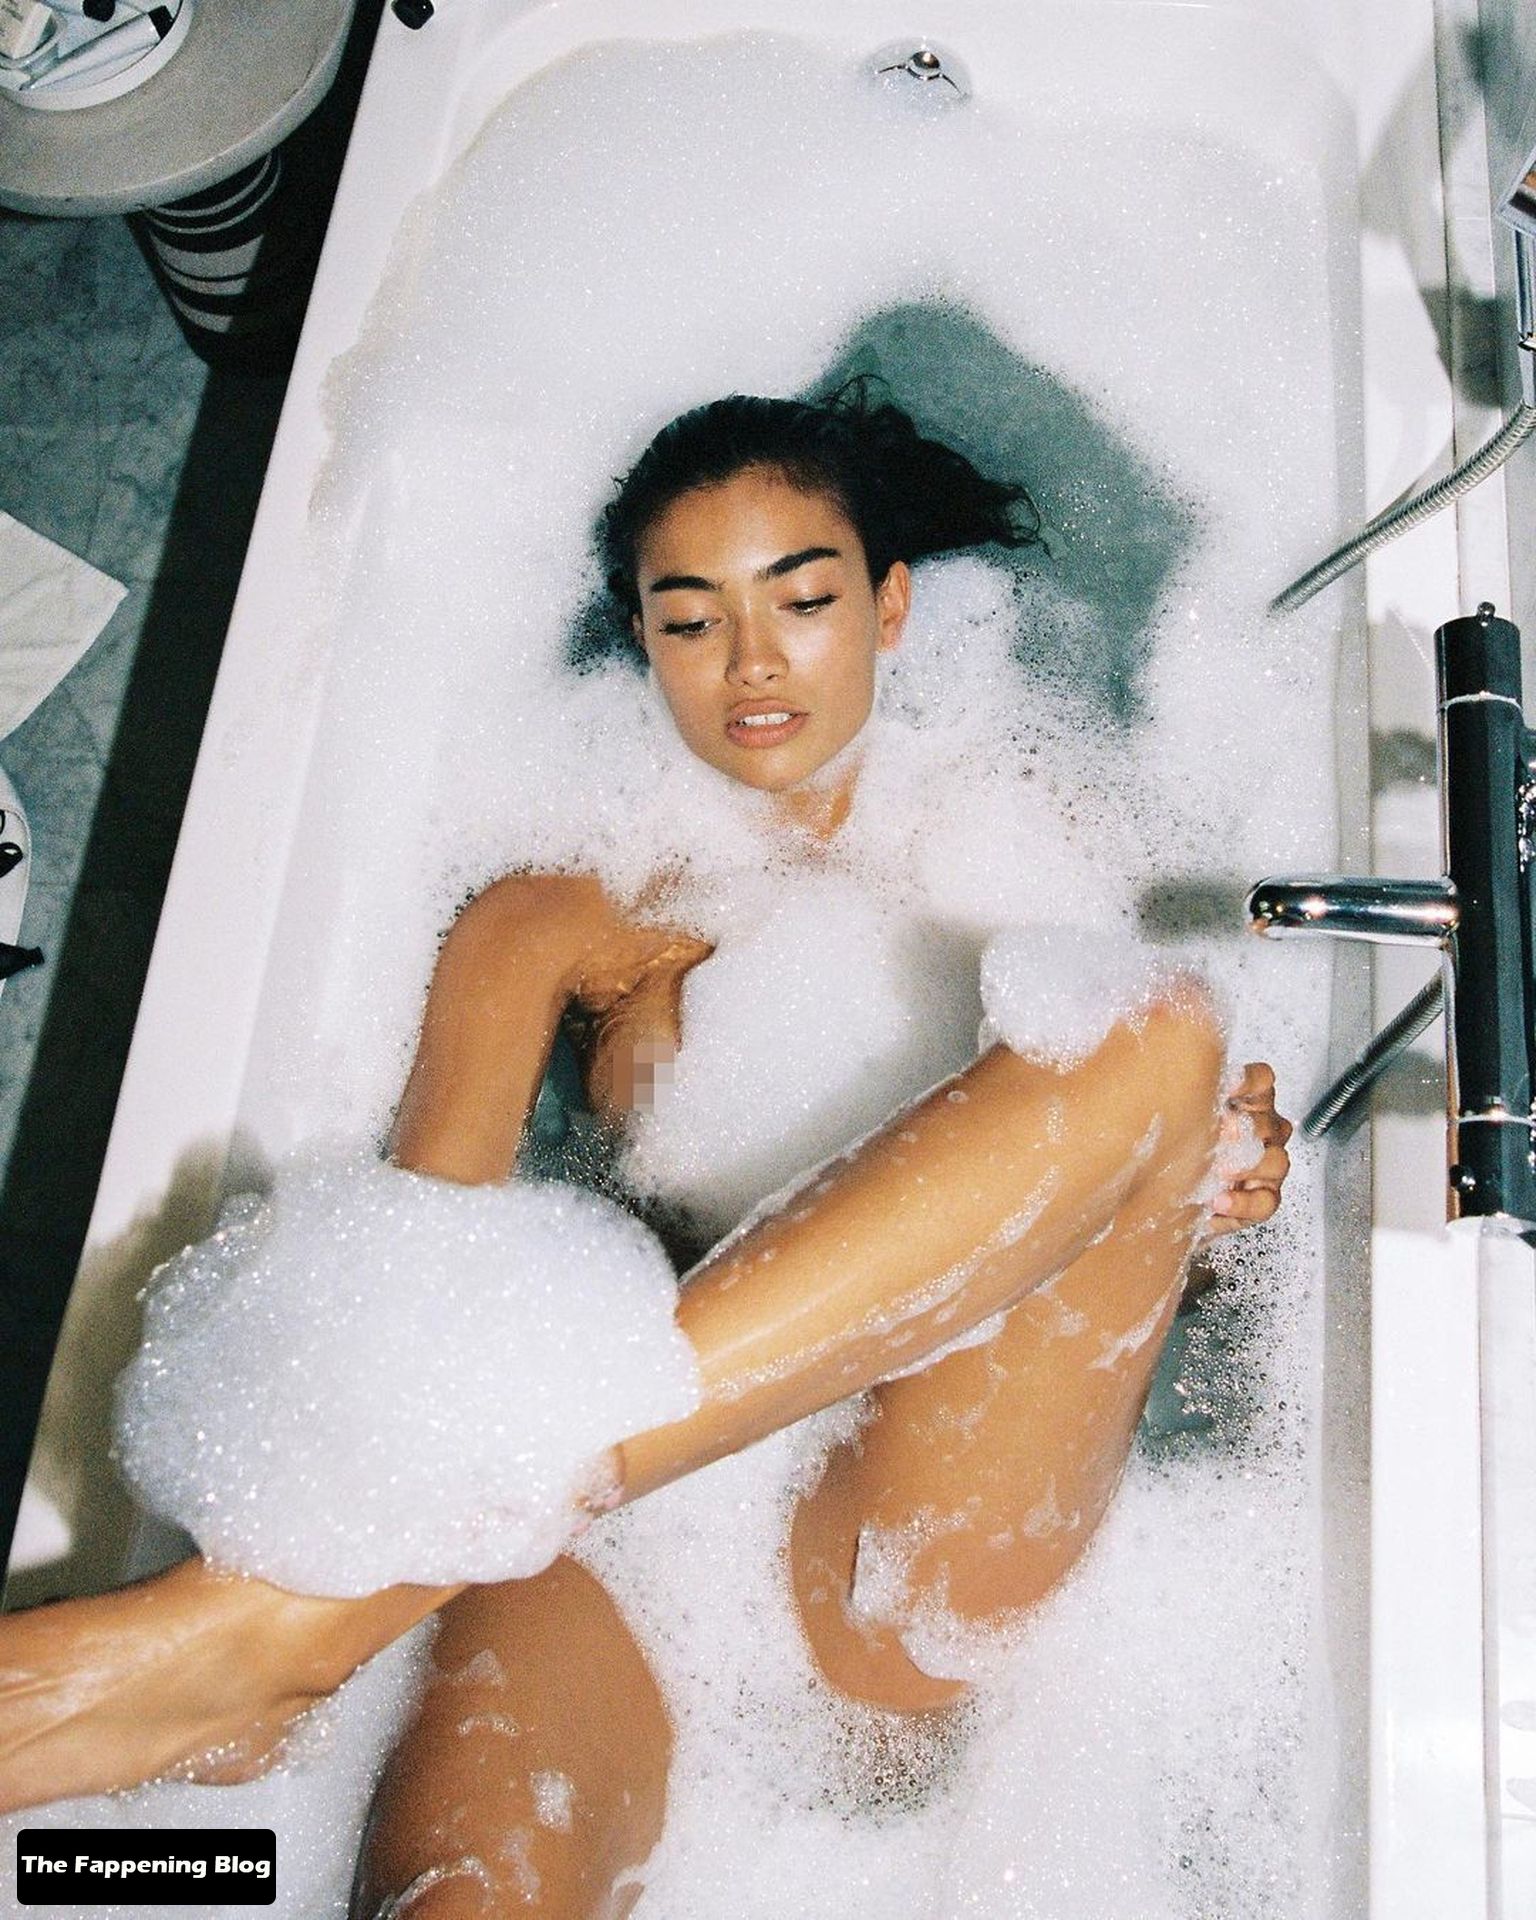 Kelly-Gale-Topless-5-1-thefappeningblog.com_.jpg